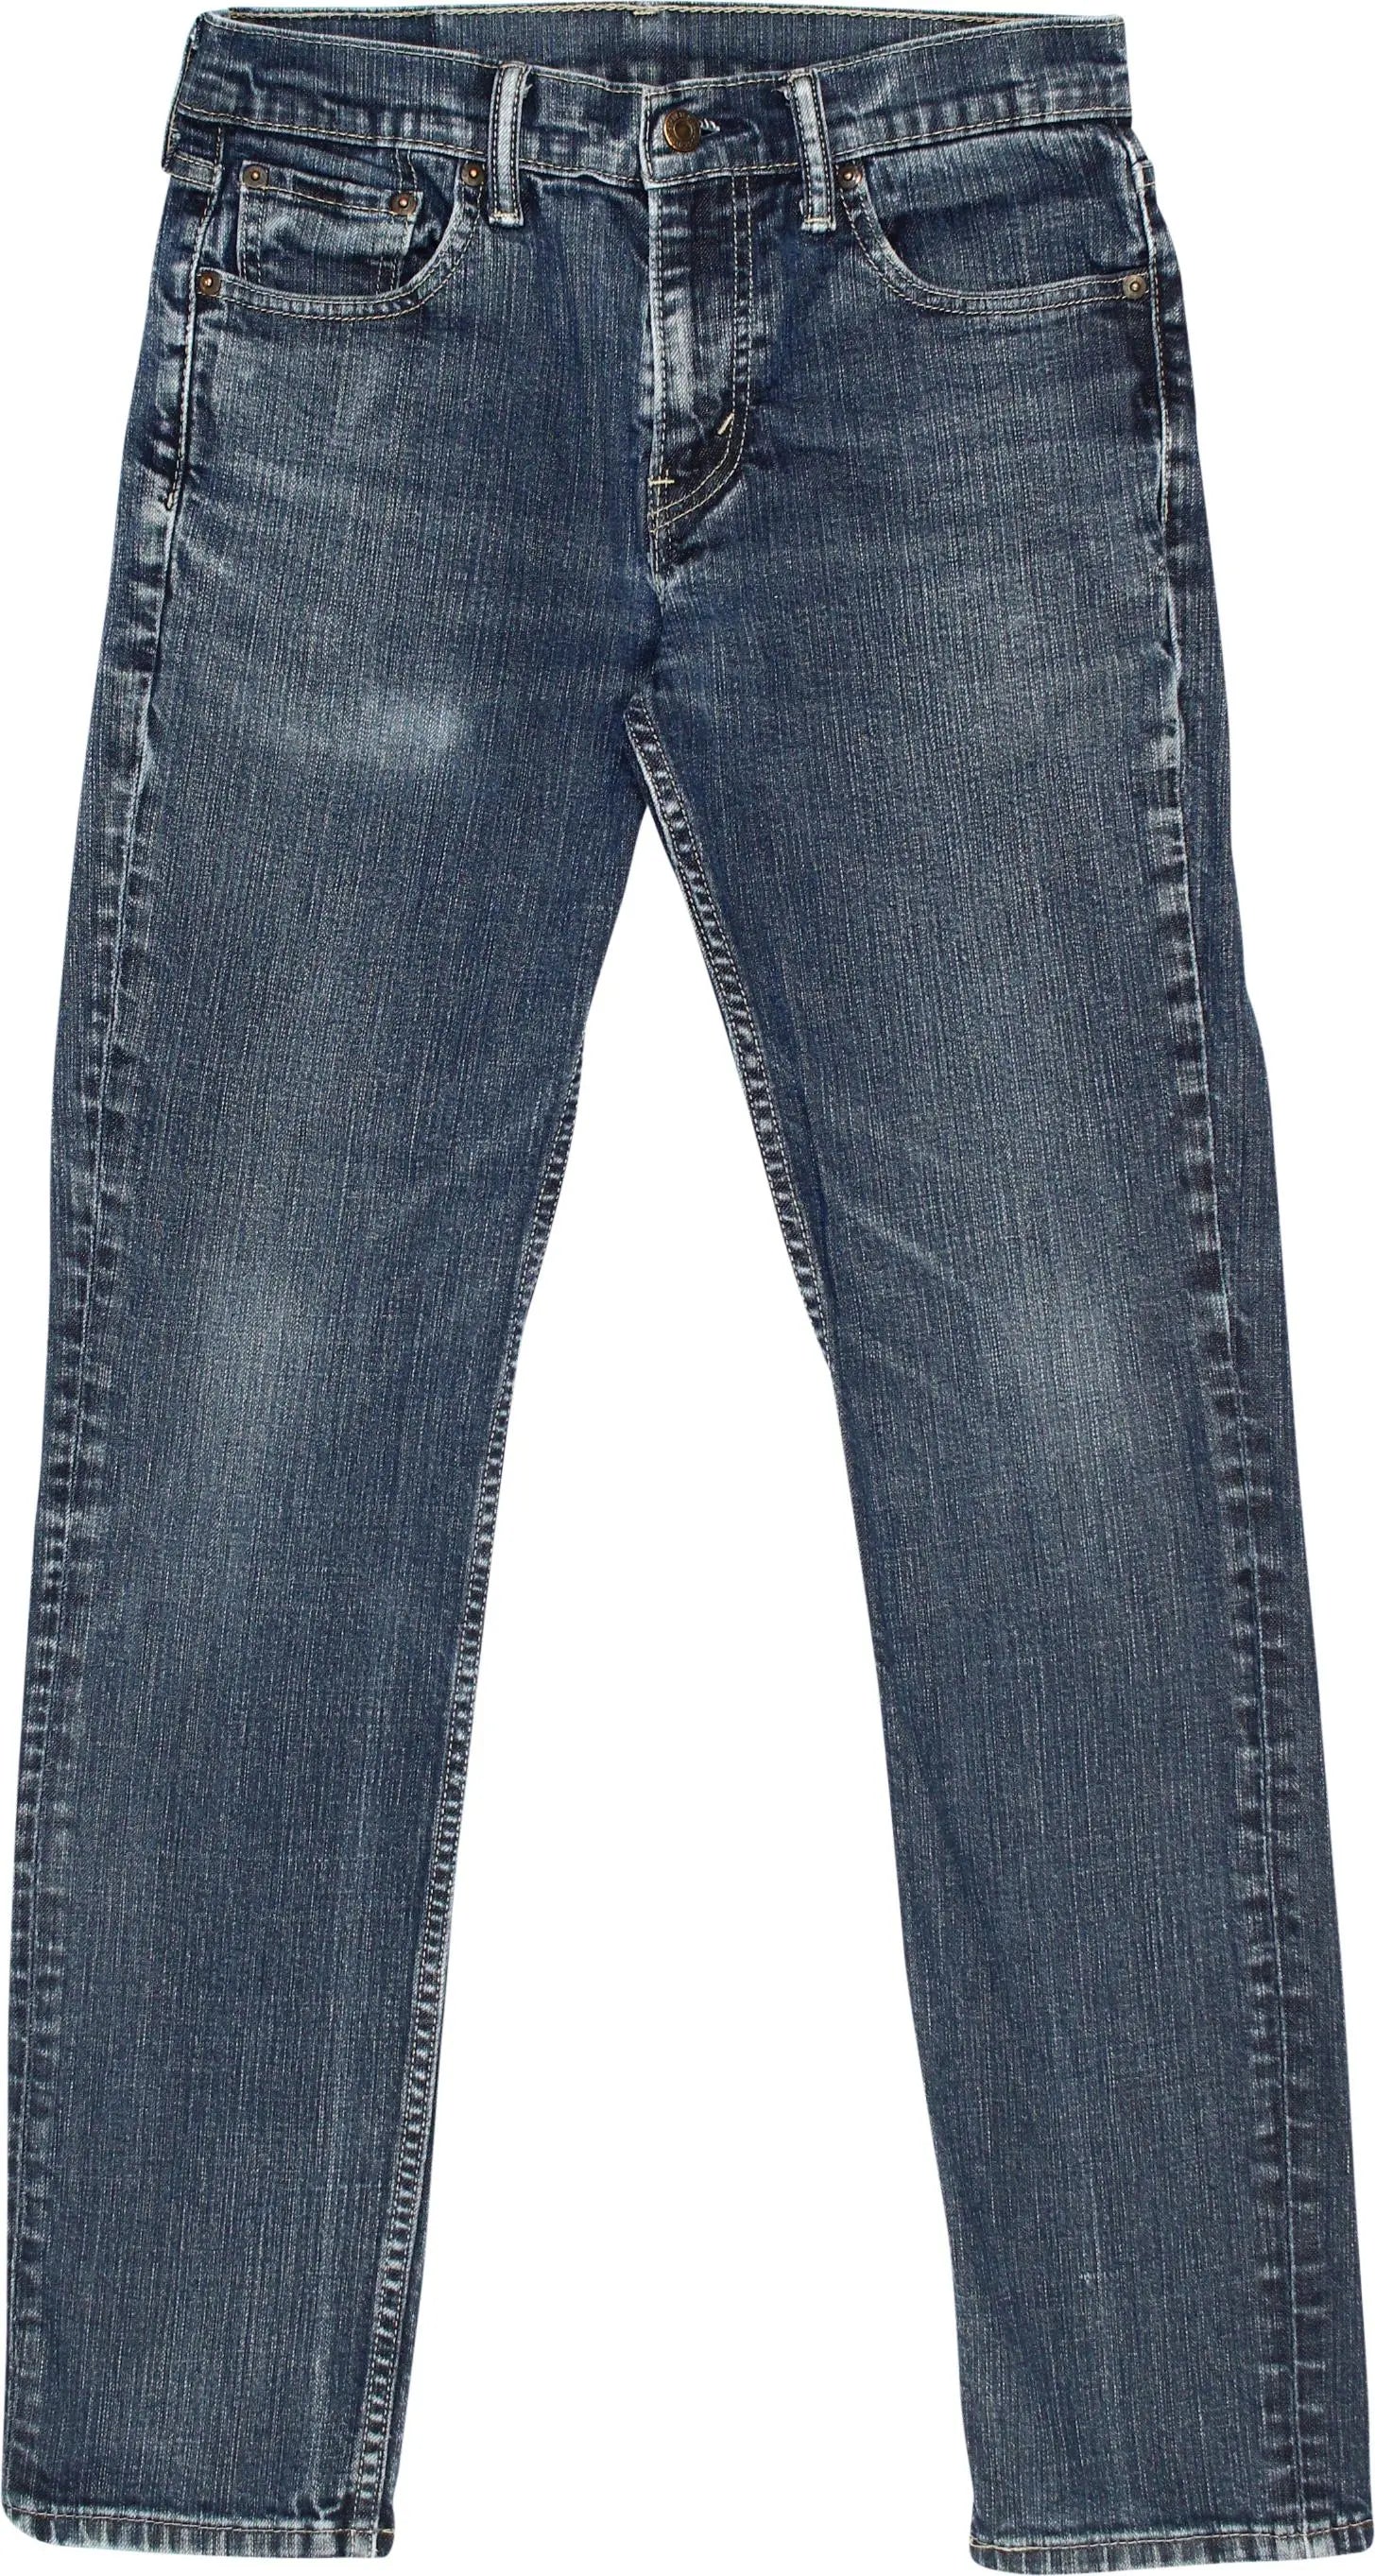 Levi's - 511 Jeans by Levi's- ThriftTale.com - Vintage and second handclothing